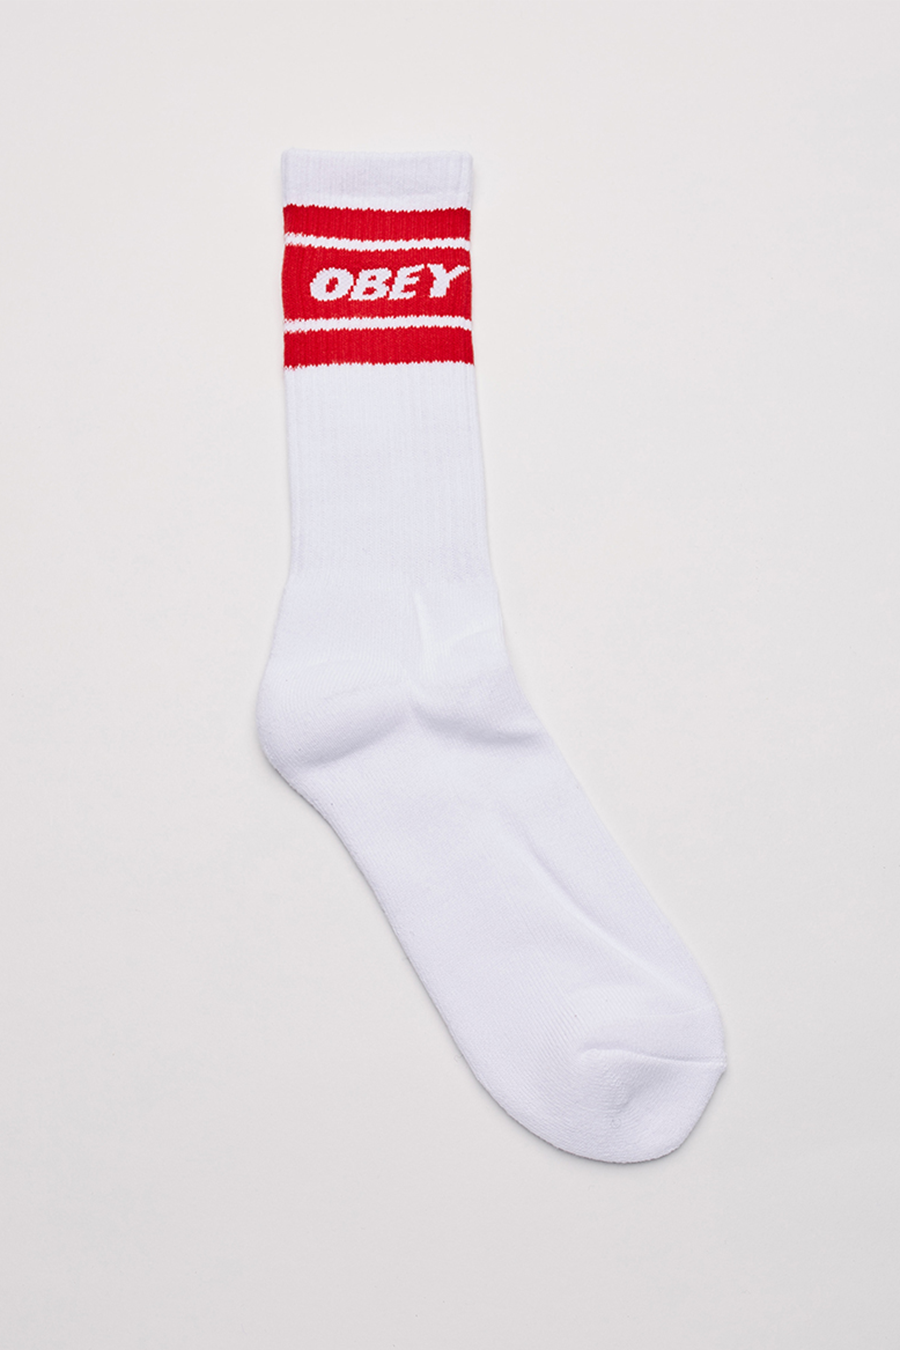 Cooper Socks | White / Rio Red - West of Camden - Main Image Number 1 of 1